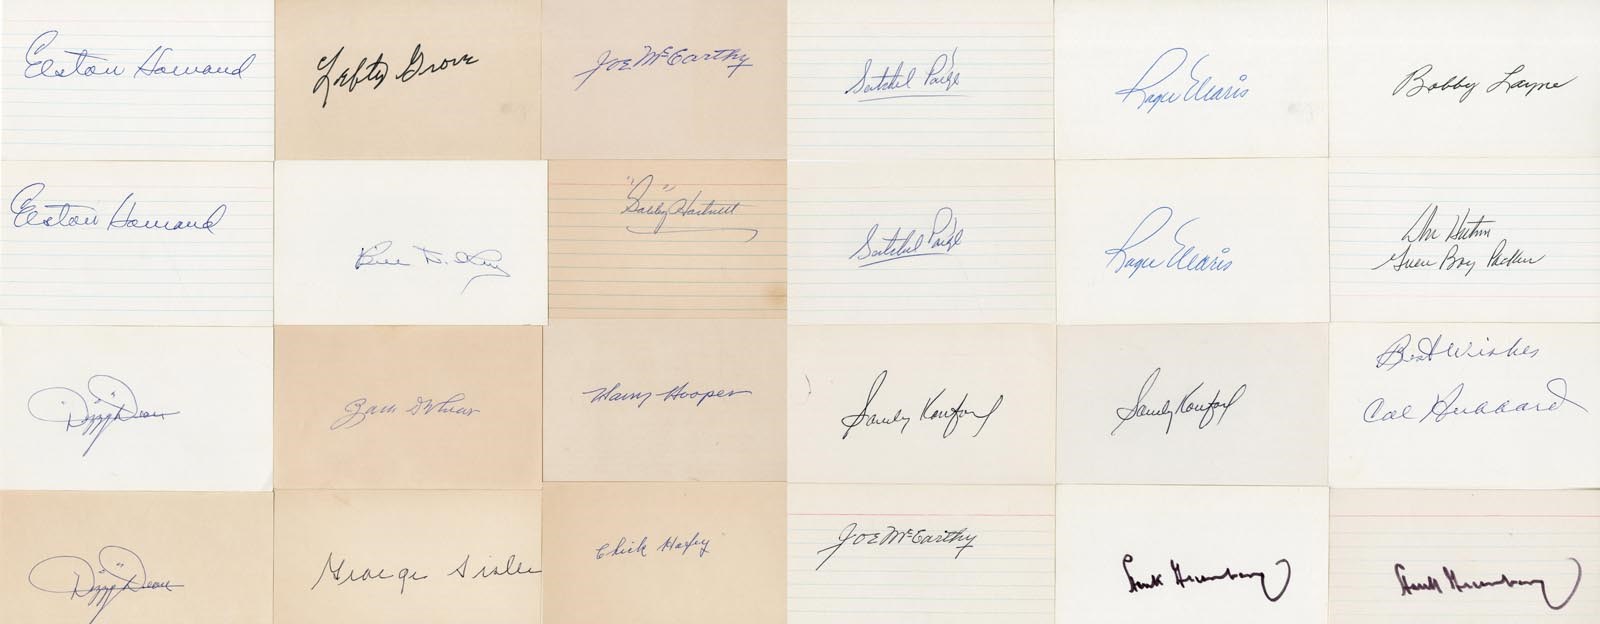 Hall of Famers and Stars Signed Index Card Collection with Major Stars (125+)